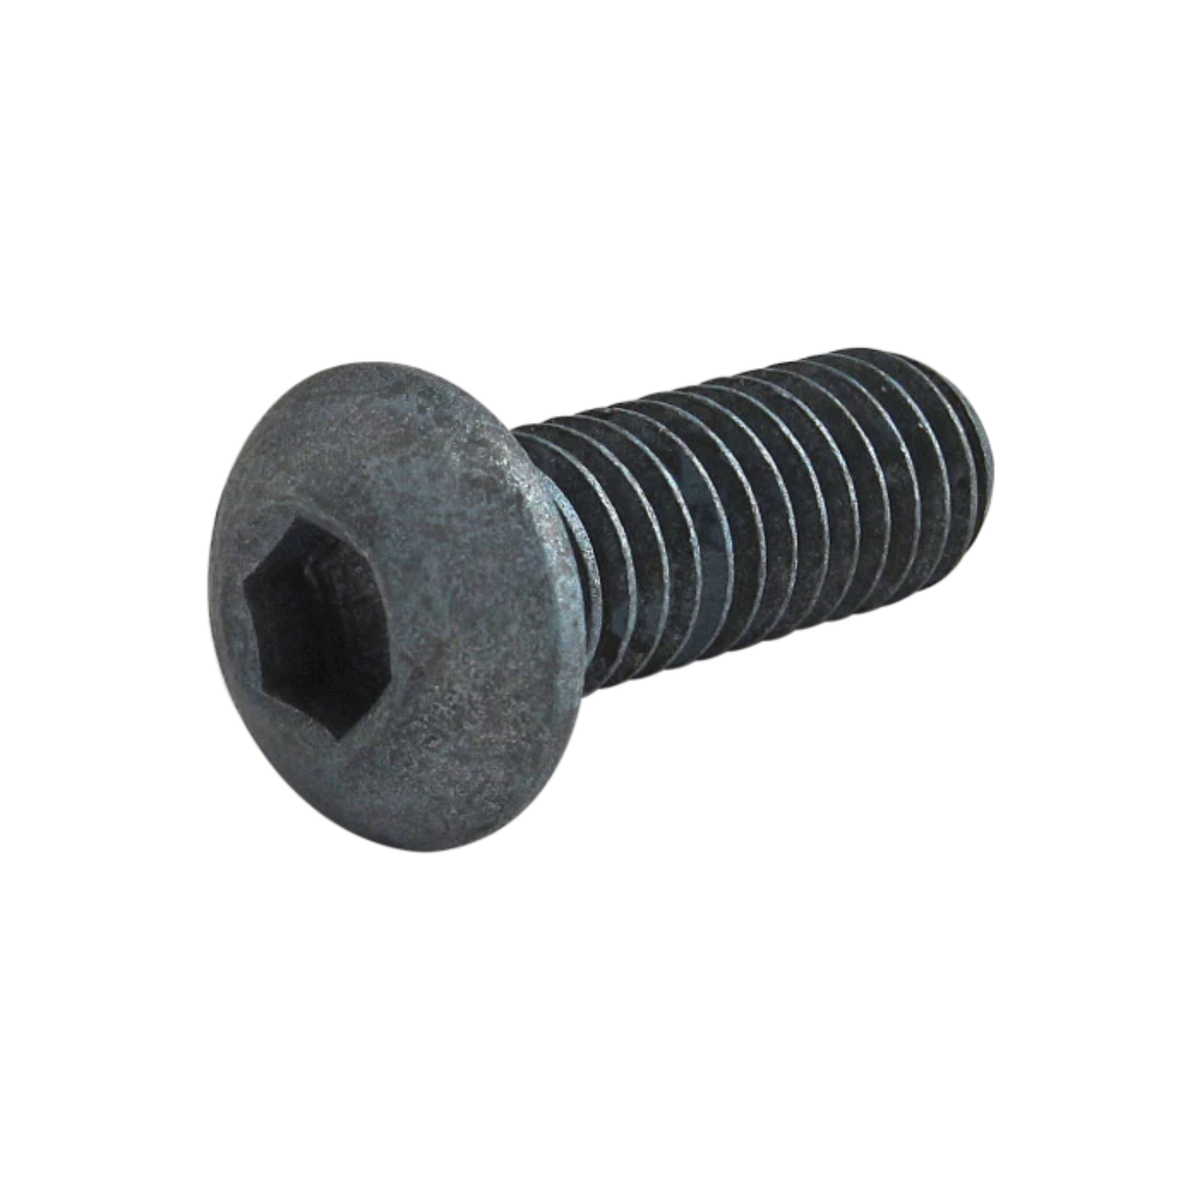 side view of a button head screw with the head on the left and the threaded stem pointing toward the right